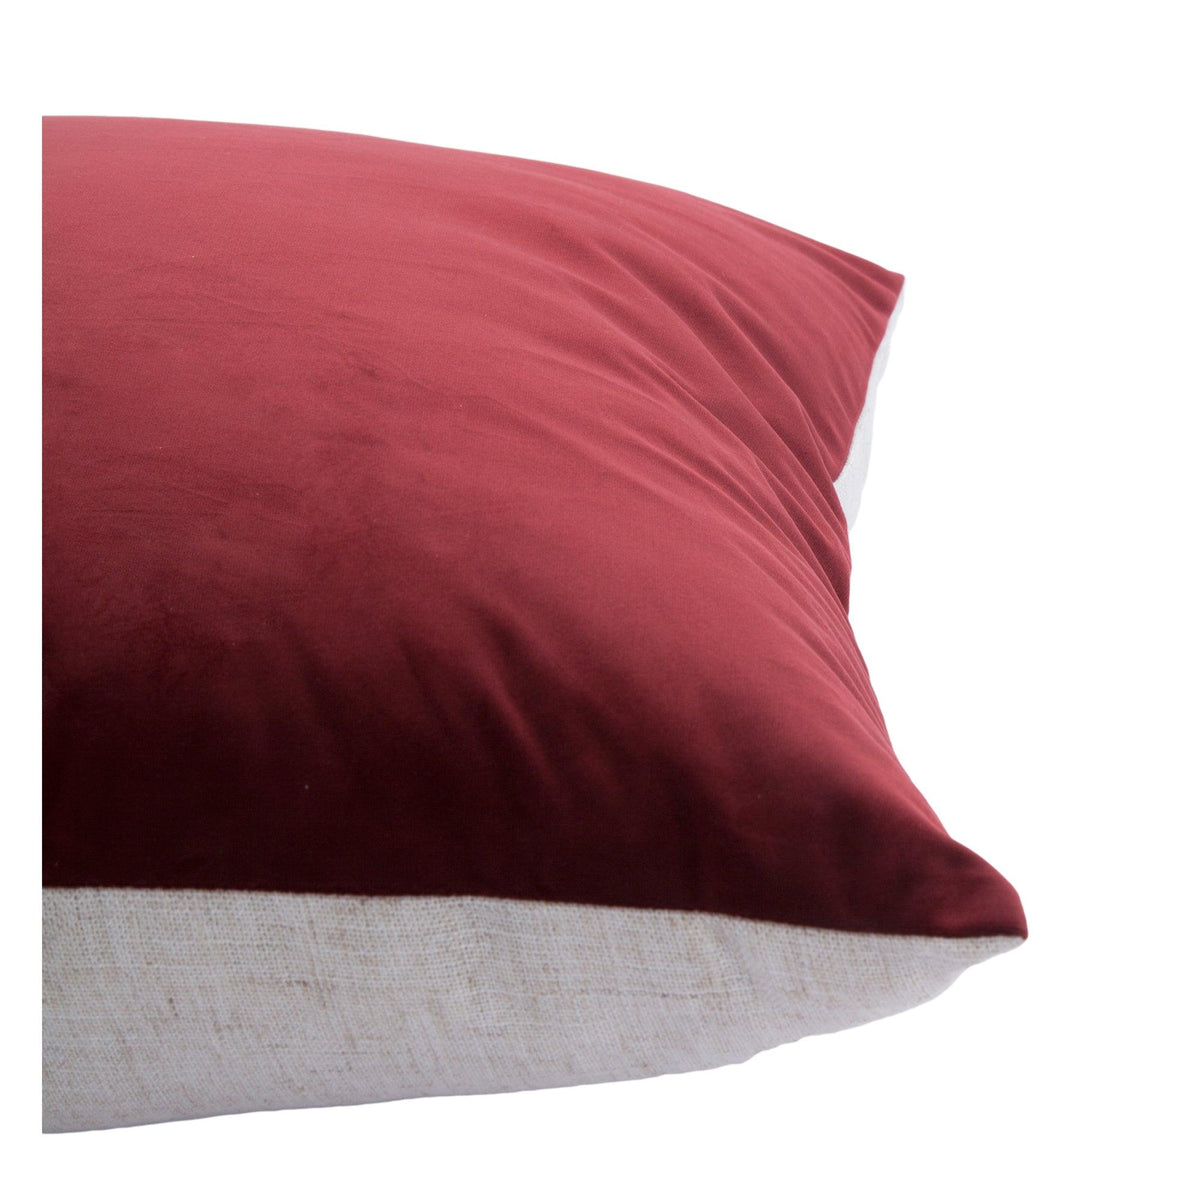 Montreal Lighting & Hardware - Scarlet Pillow by Renwil - Montreal Lighting & Hardware